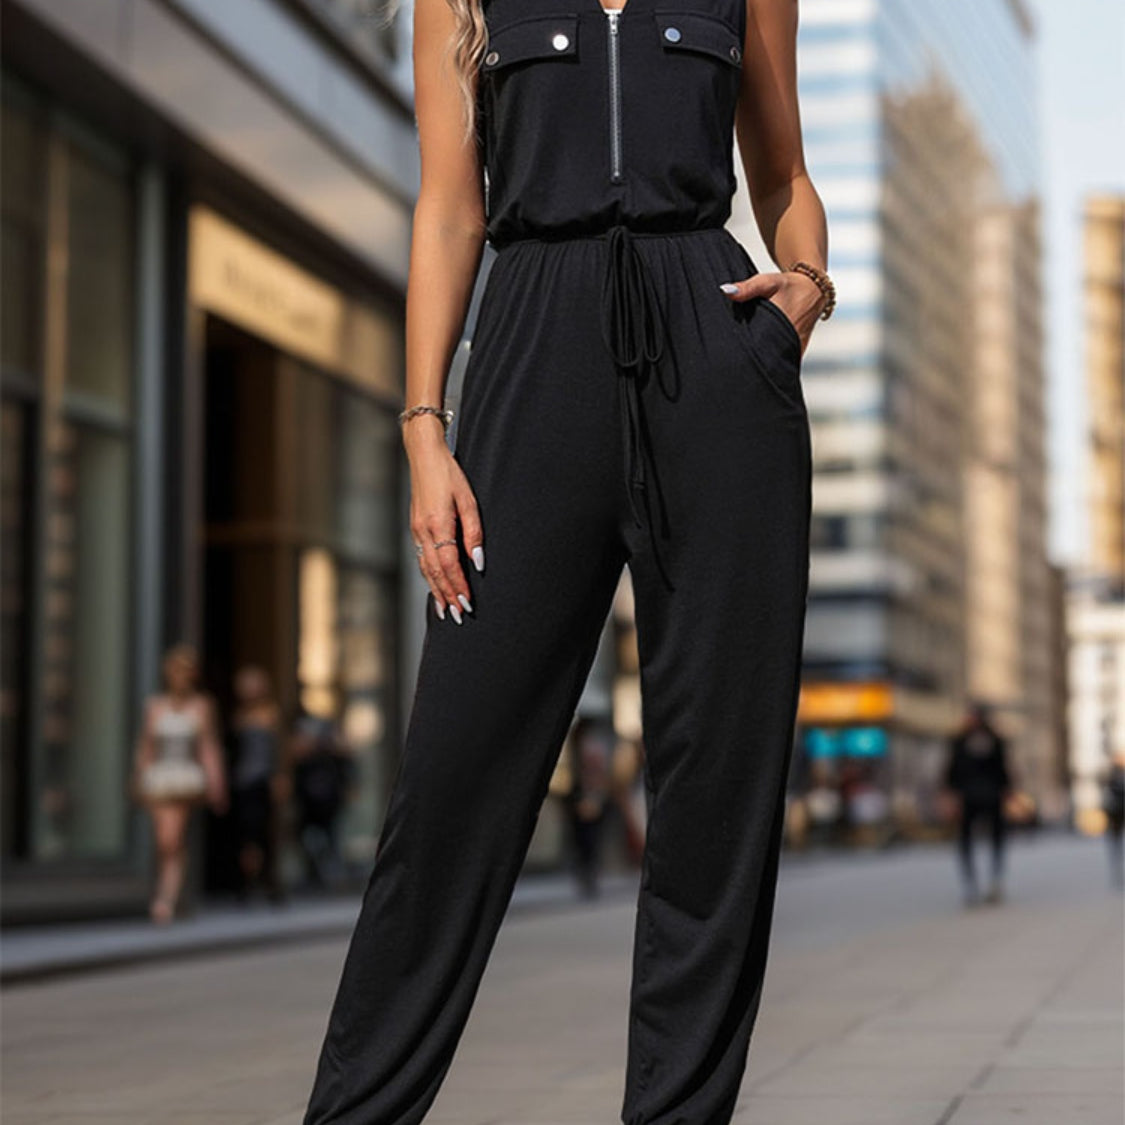 Half Zip Sleeveless Jumpsuit with Pockets Casual Chic Boutique